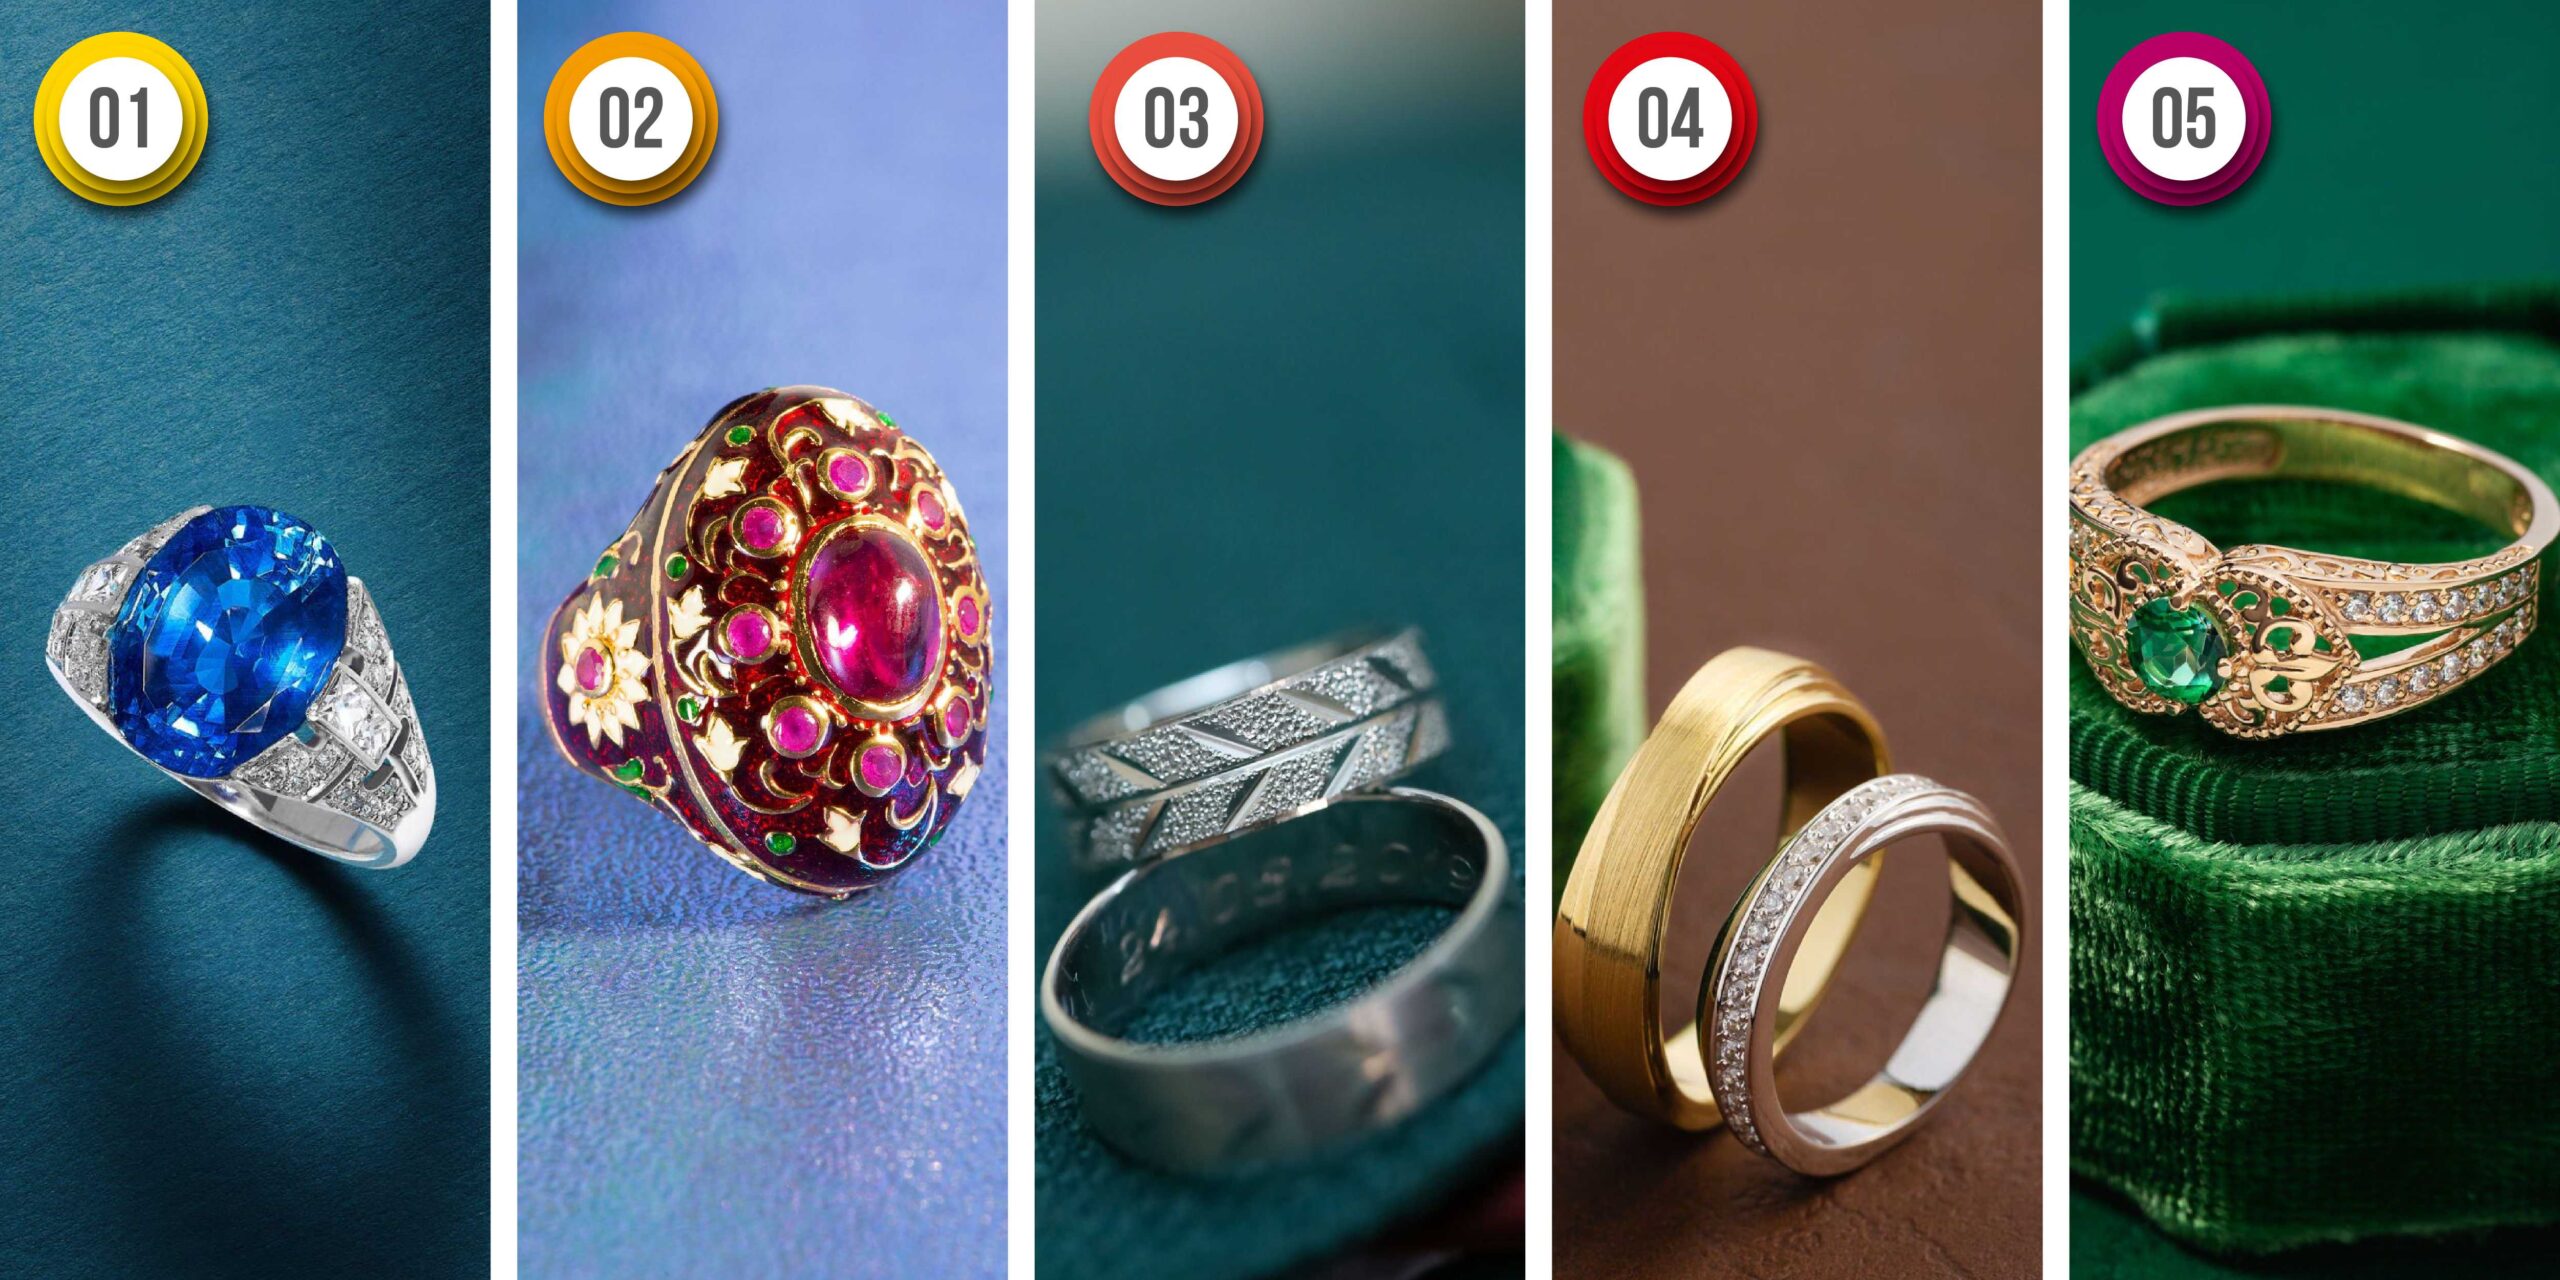 Personality test: Choosing a ring is never trivial! Take the test to find out what your favorite jewel reveals about you!